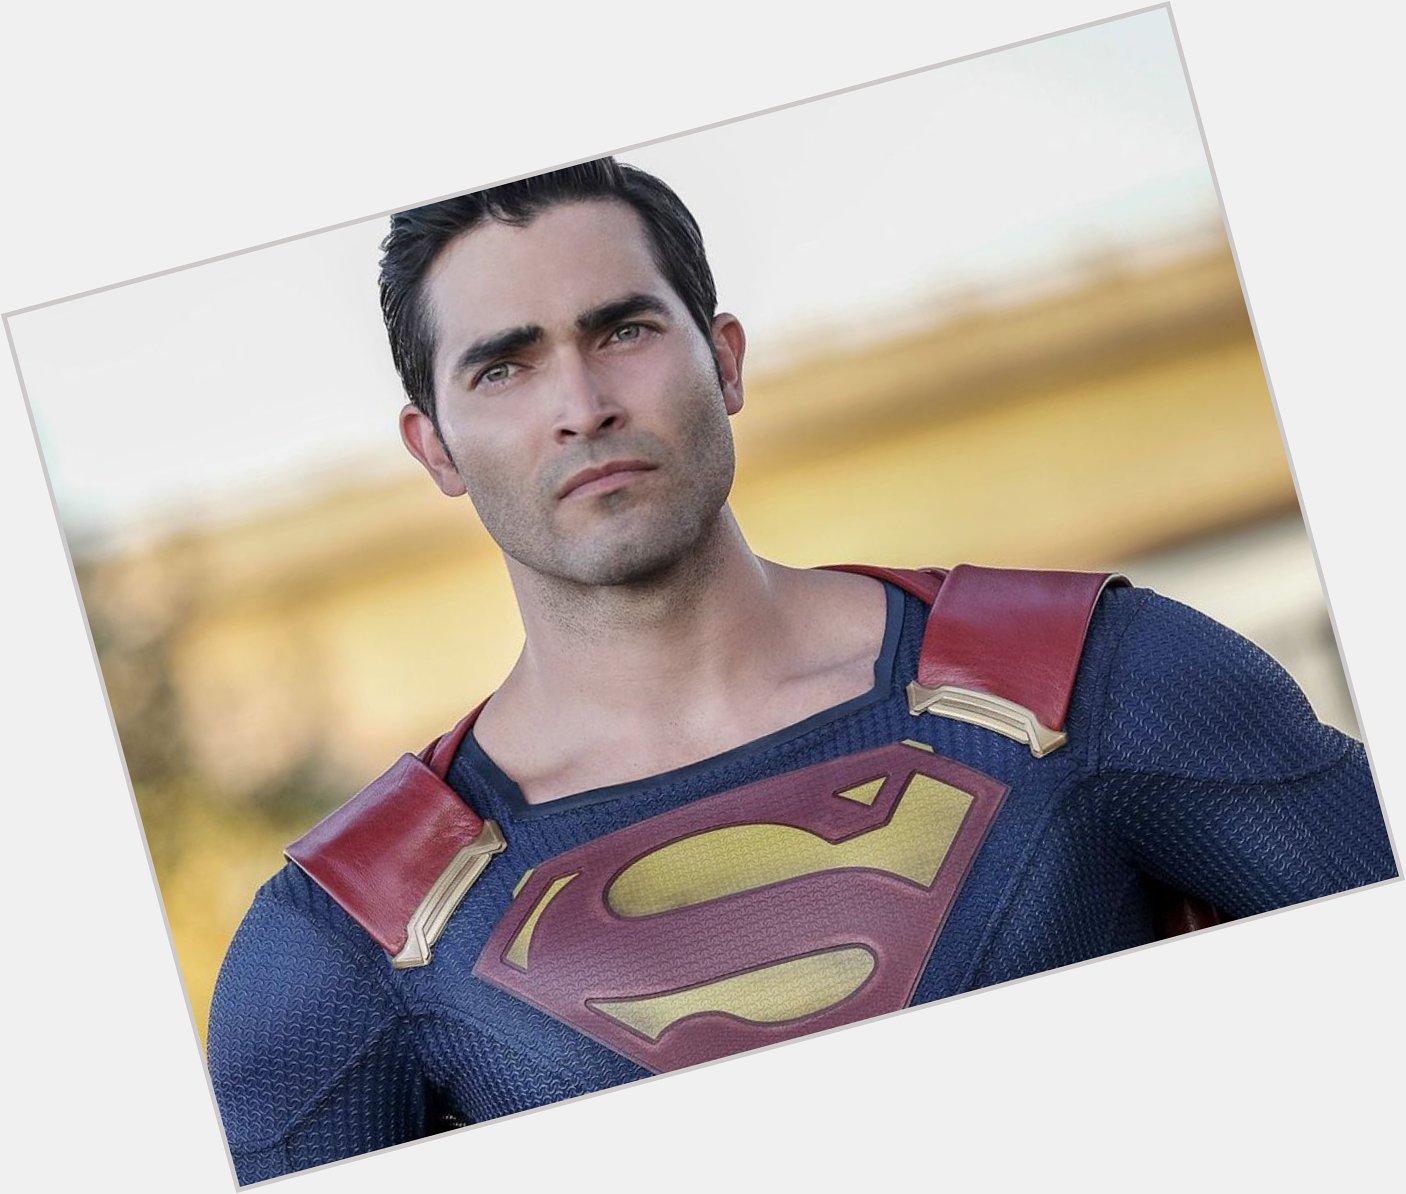 He is the man of steel in the Arrowverse, today we wish Superman aka Tyler Hoechlin a very happy 33rd birthday!!! 